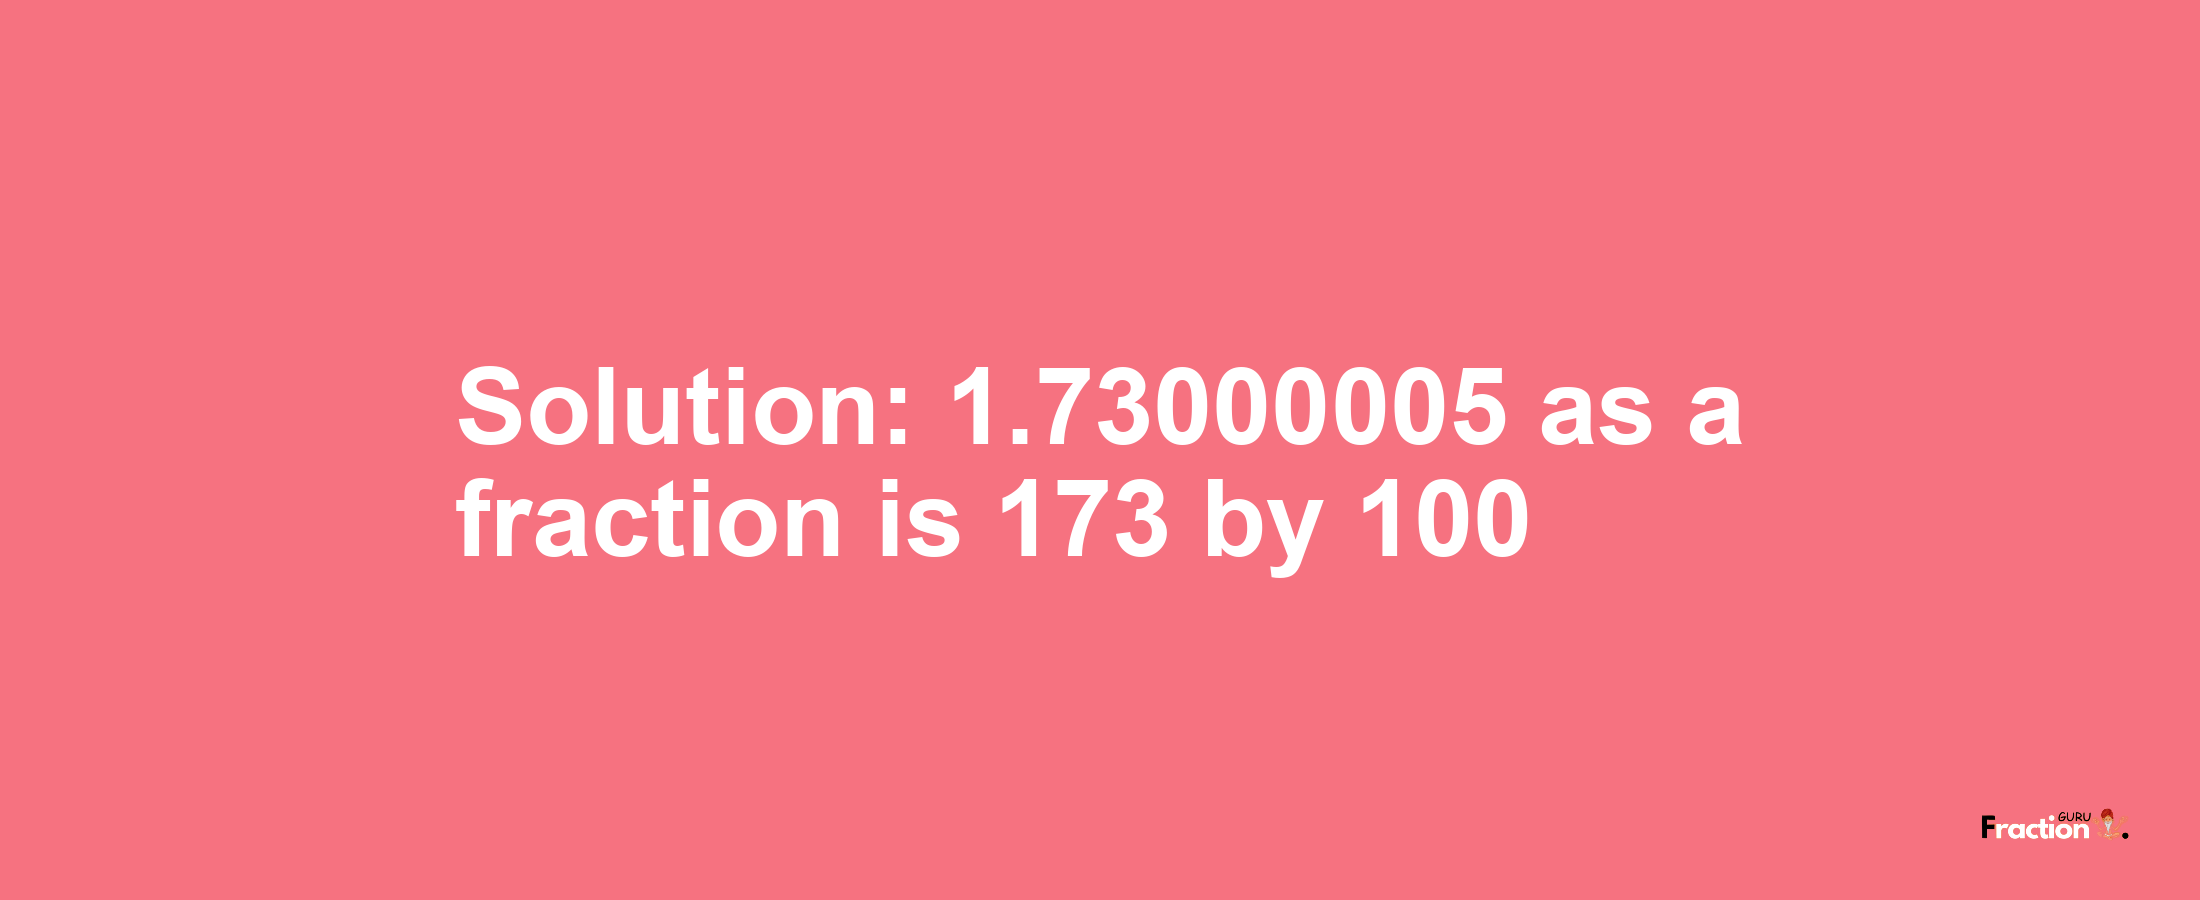 Solution:1.73000005 as a fraction is 173/100